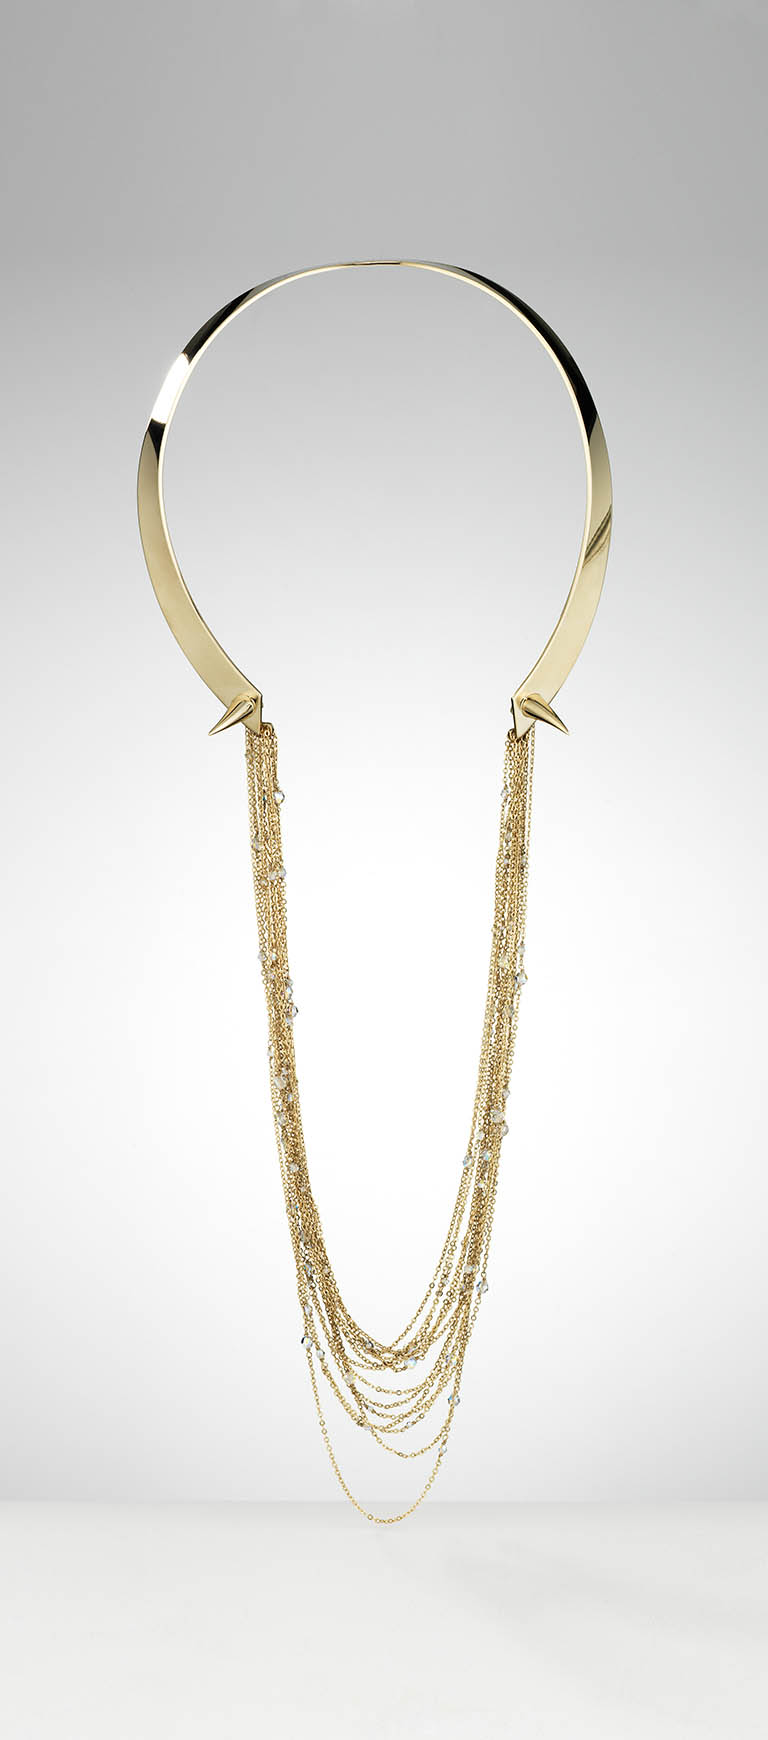 Jewellery Photography of Eden Diodati gold necklace with chain by Packshot Factory